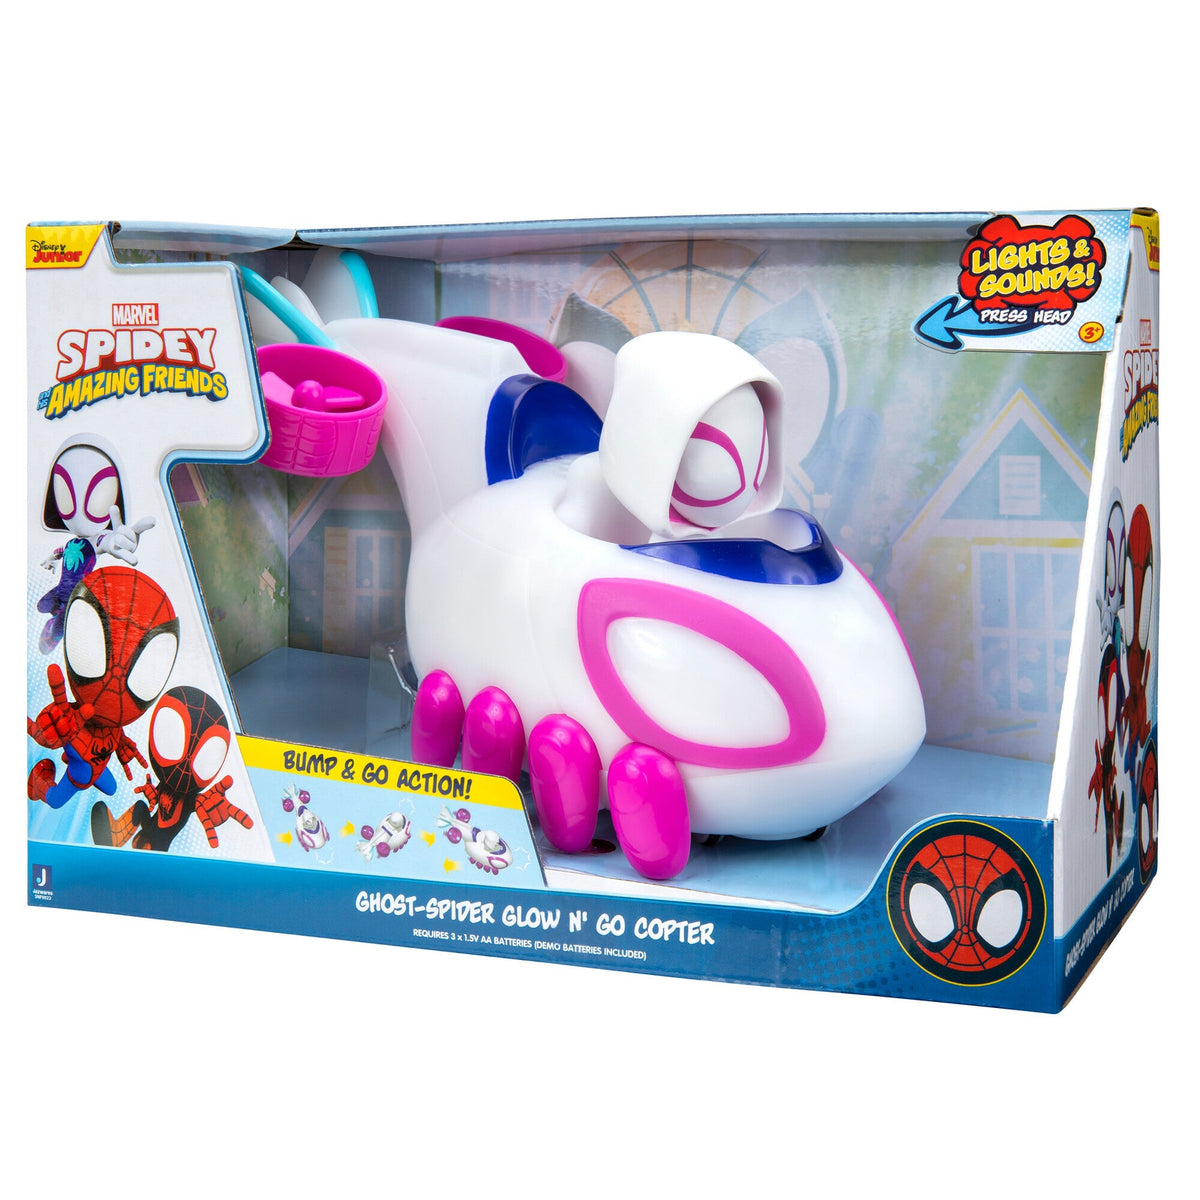 Spidey and His Amazing Friends Ghost-Spider Glow N Go Copter Feature V —  Kidstuff